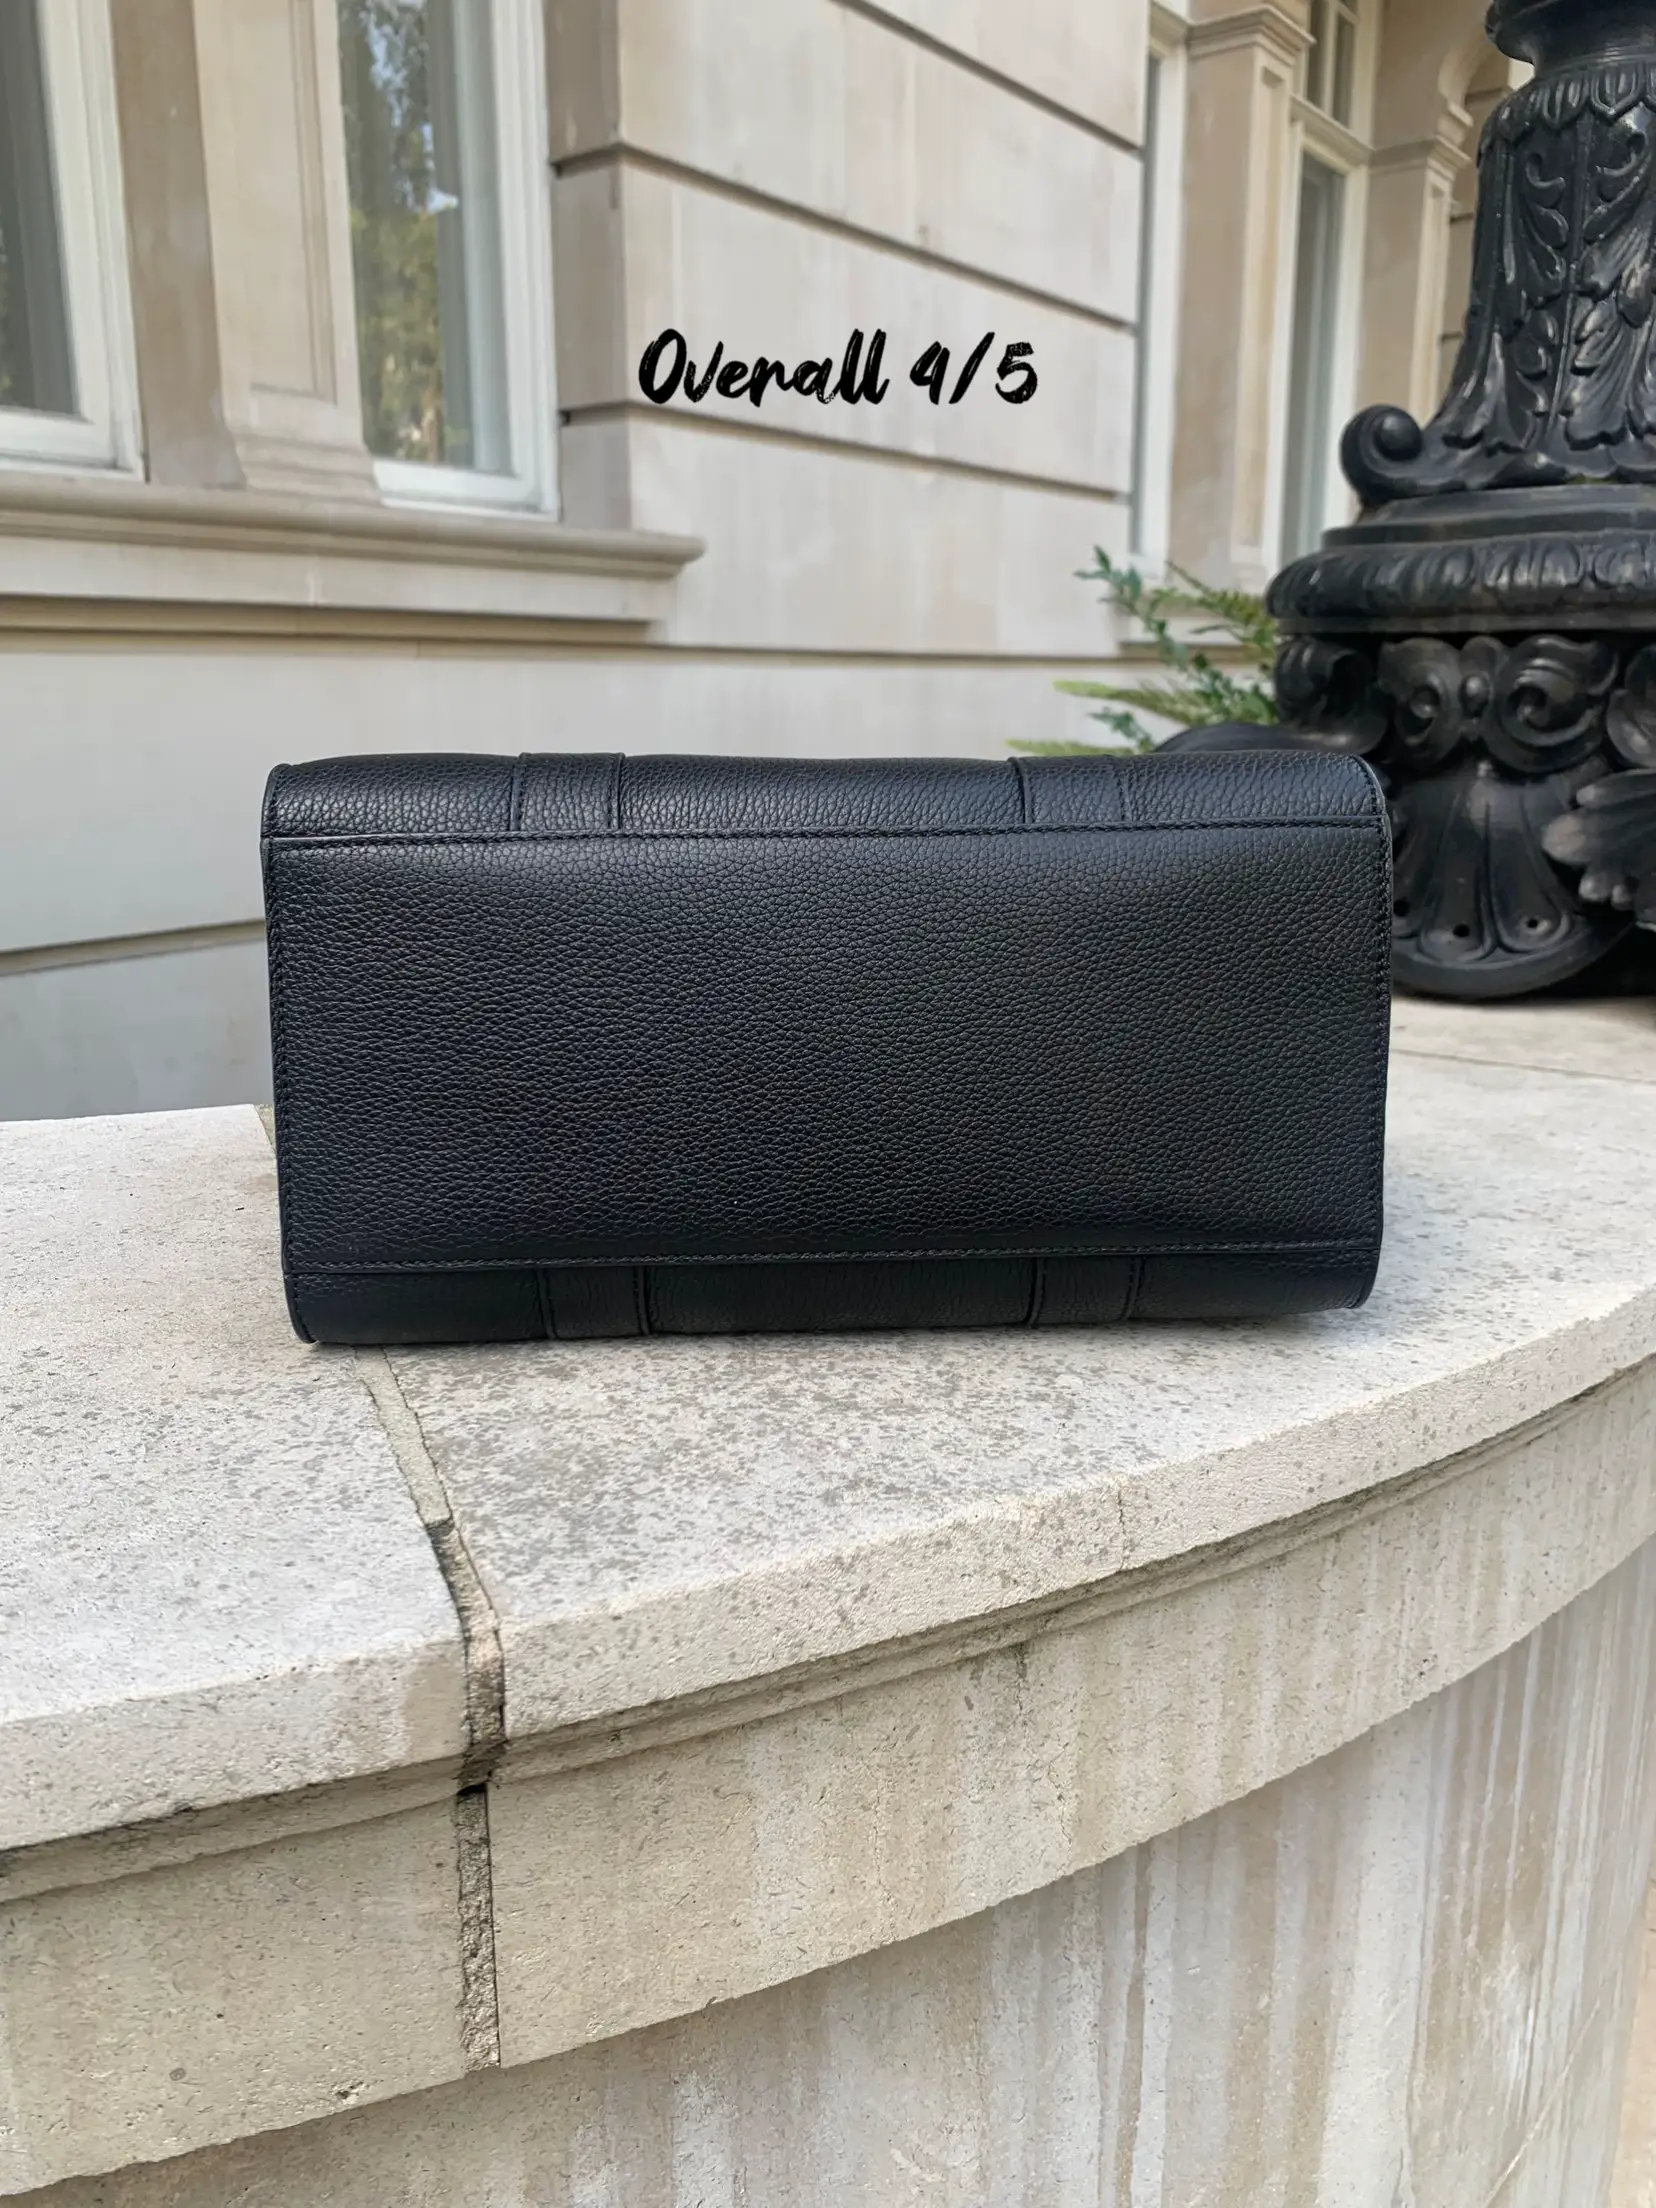 Mulberry bag, honest review, Gallery posted by Kavveeta